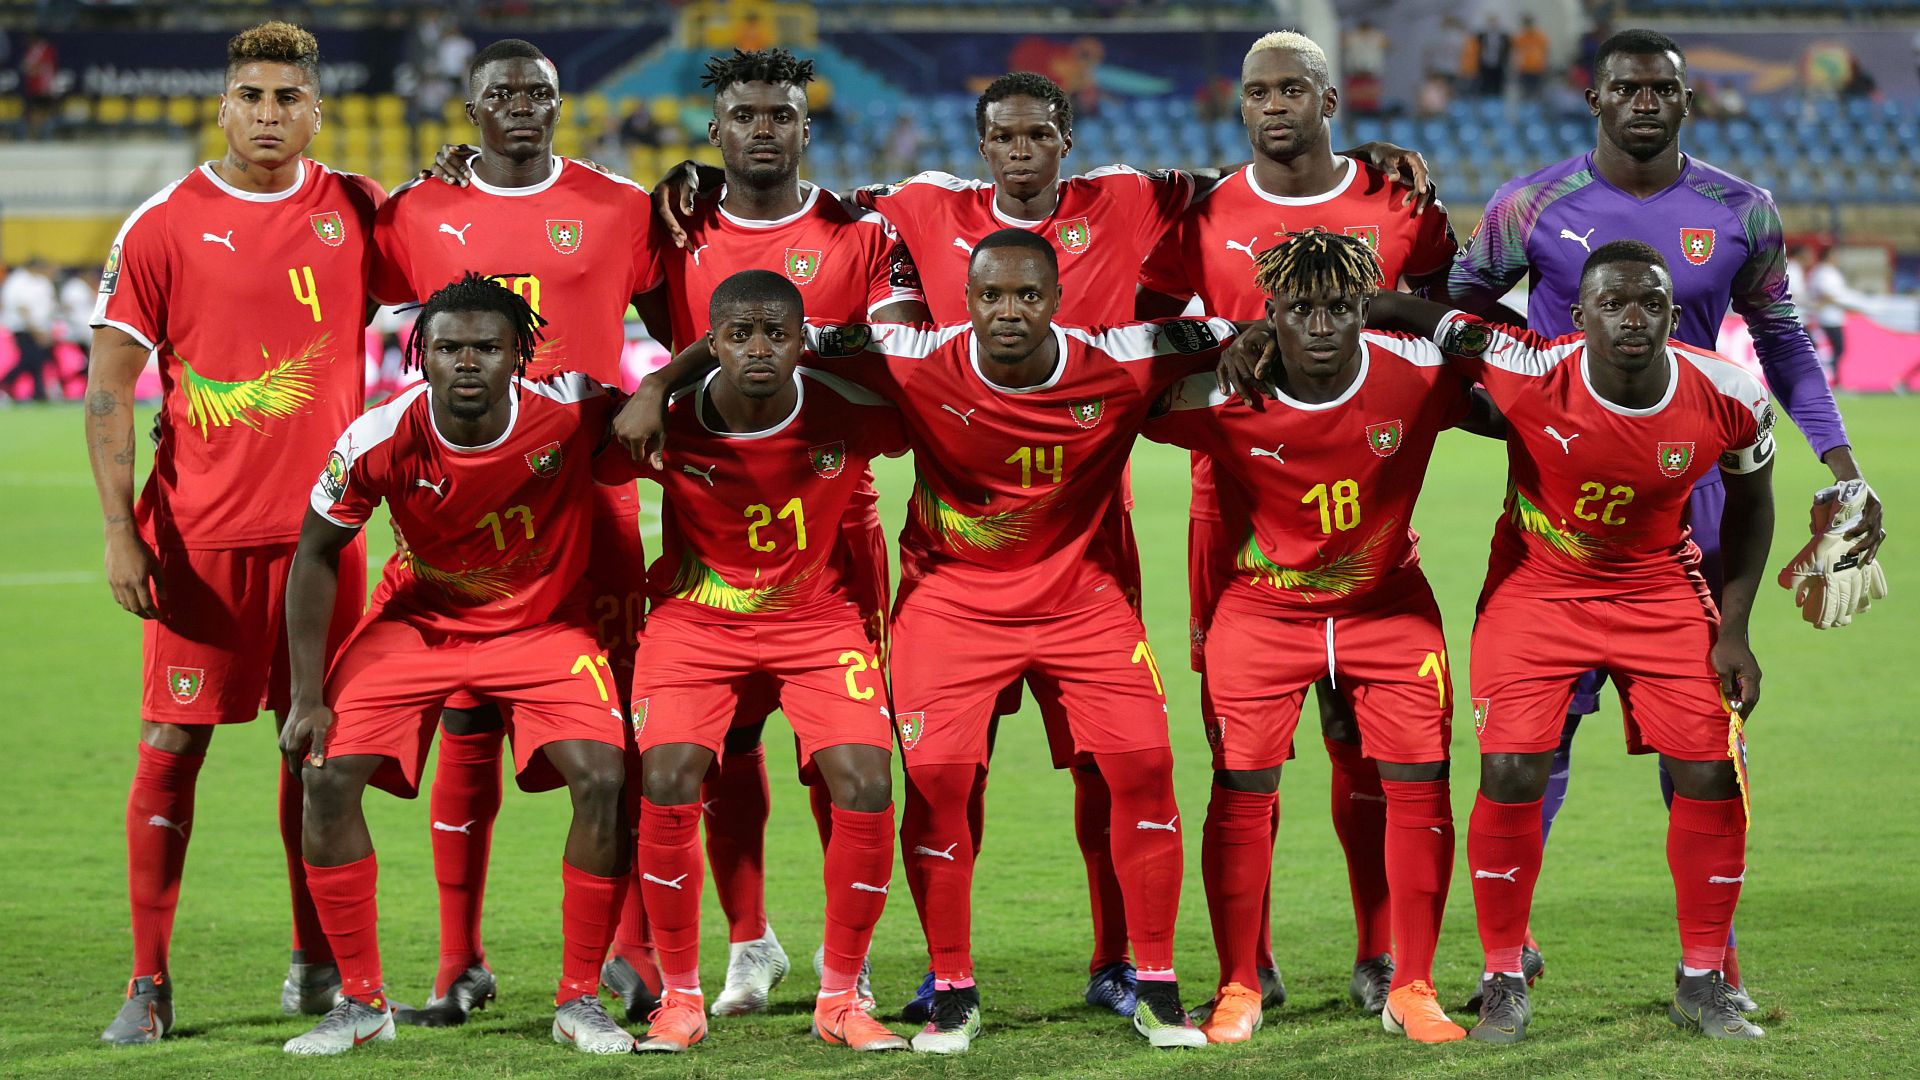 Guinea-Bissau National Football Team Squad, Players, Stadium, Kits, and much more